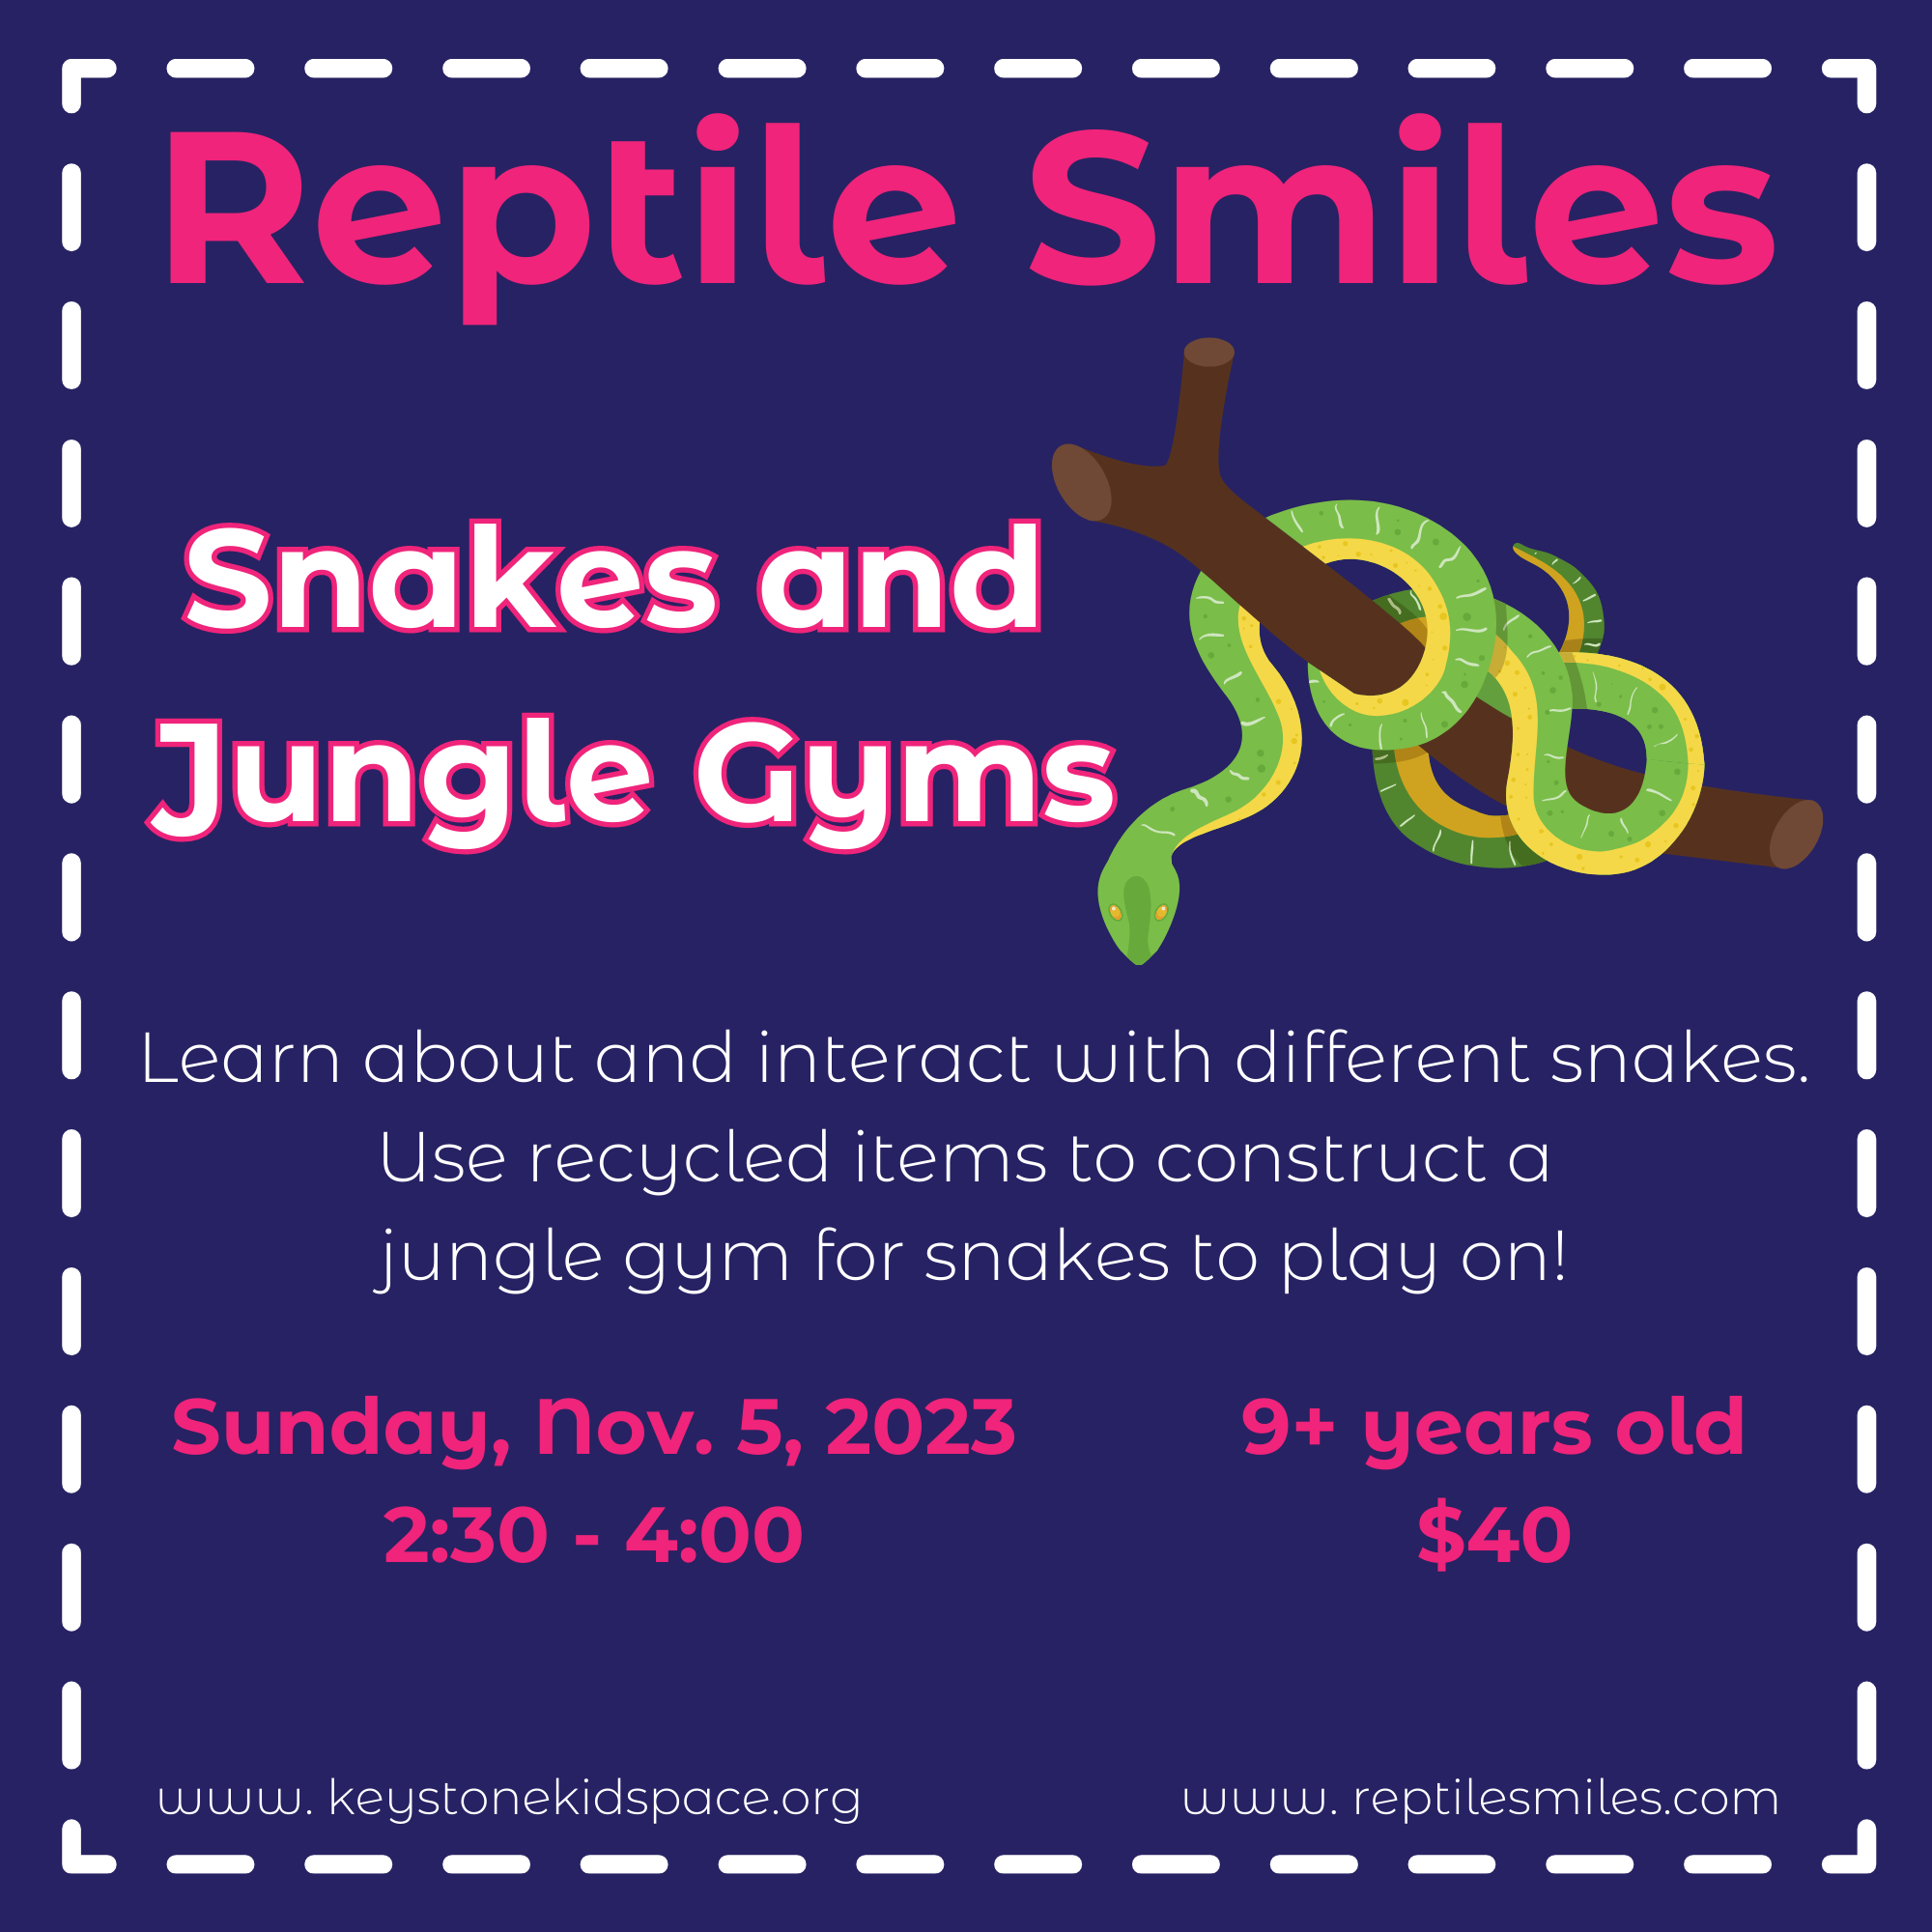 Reptile Smiles: Snakes and Jungle Gyms